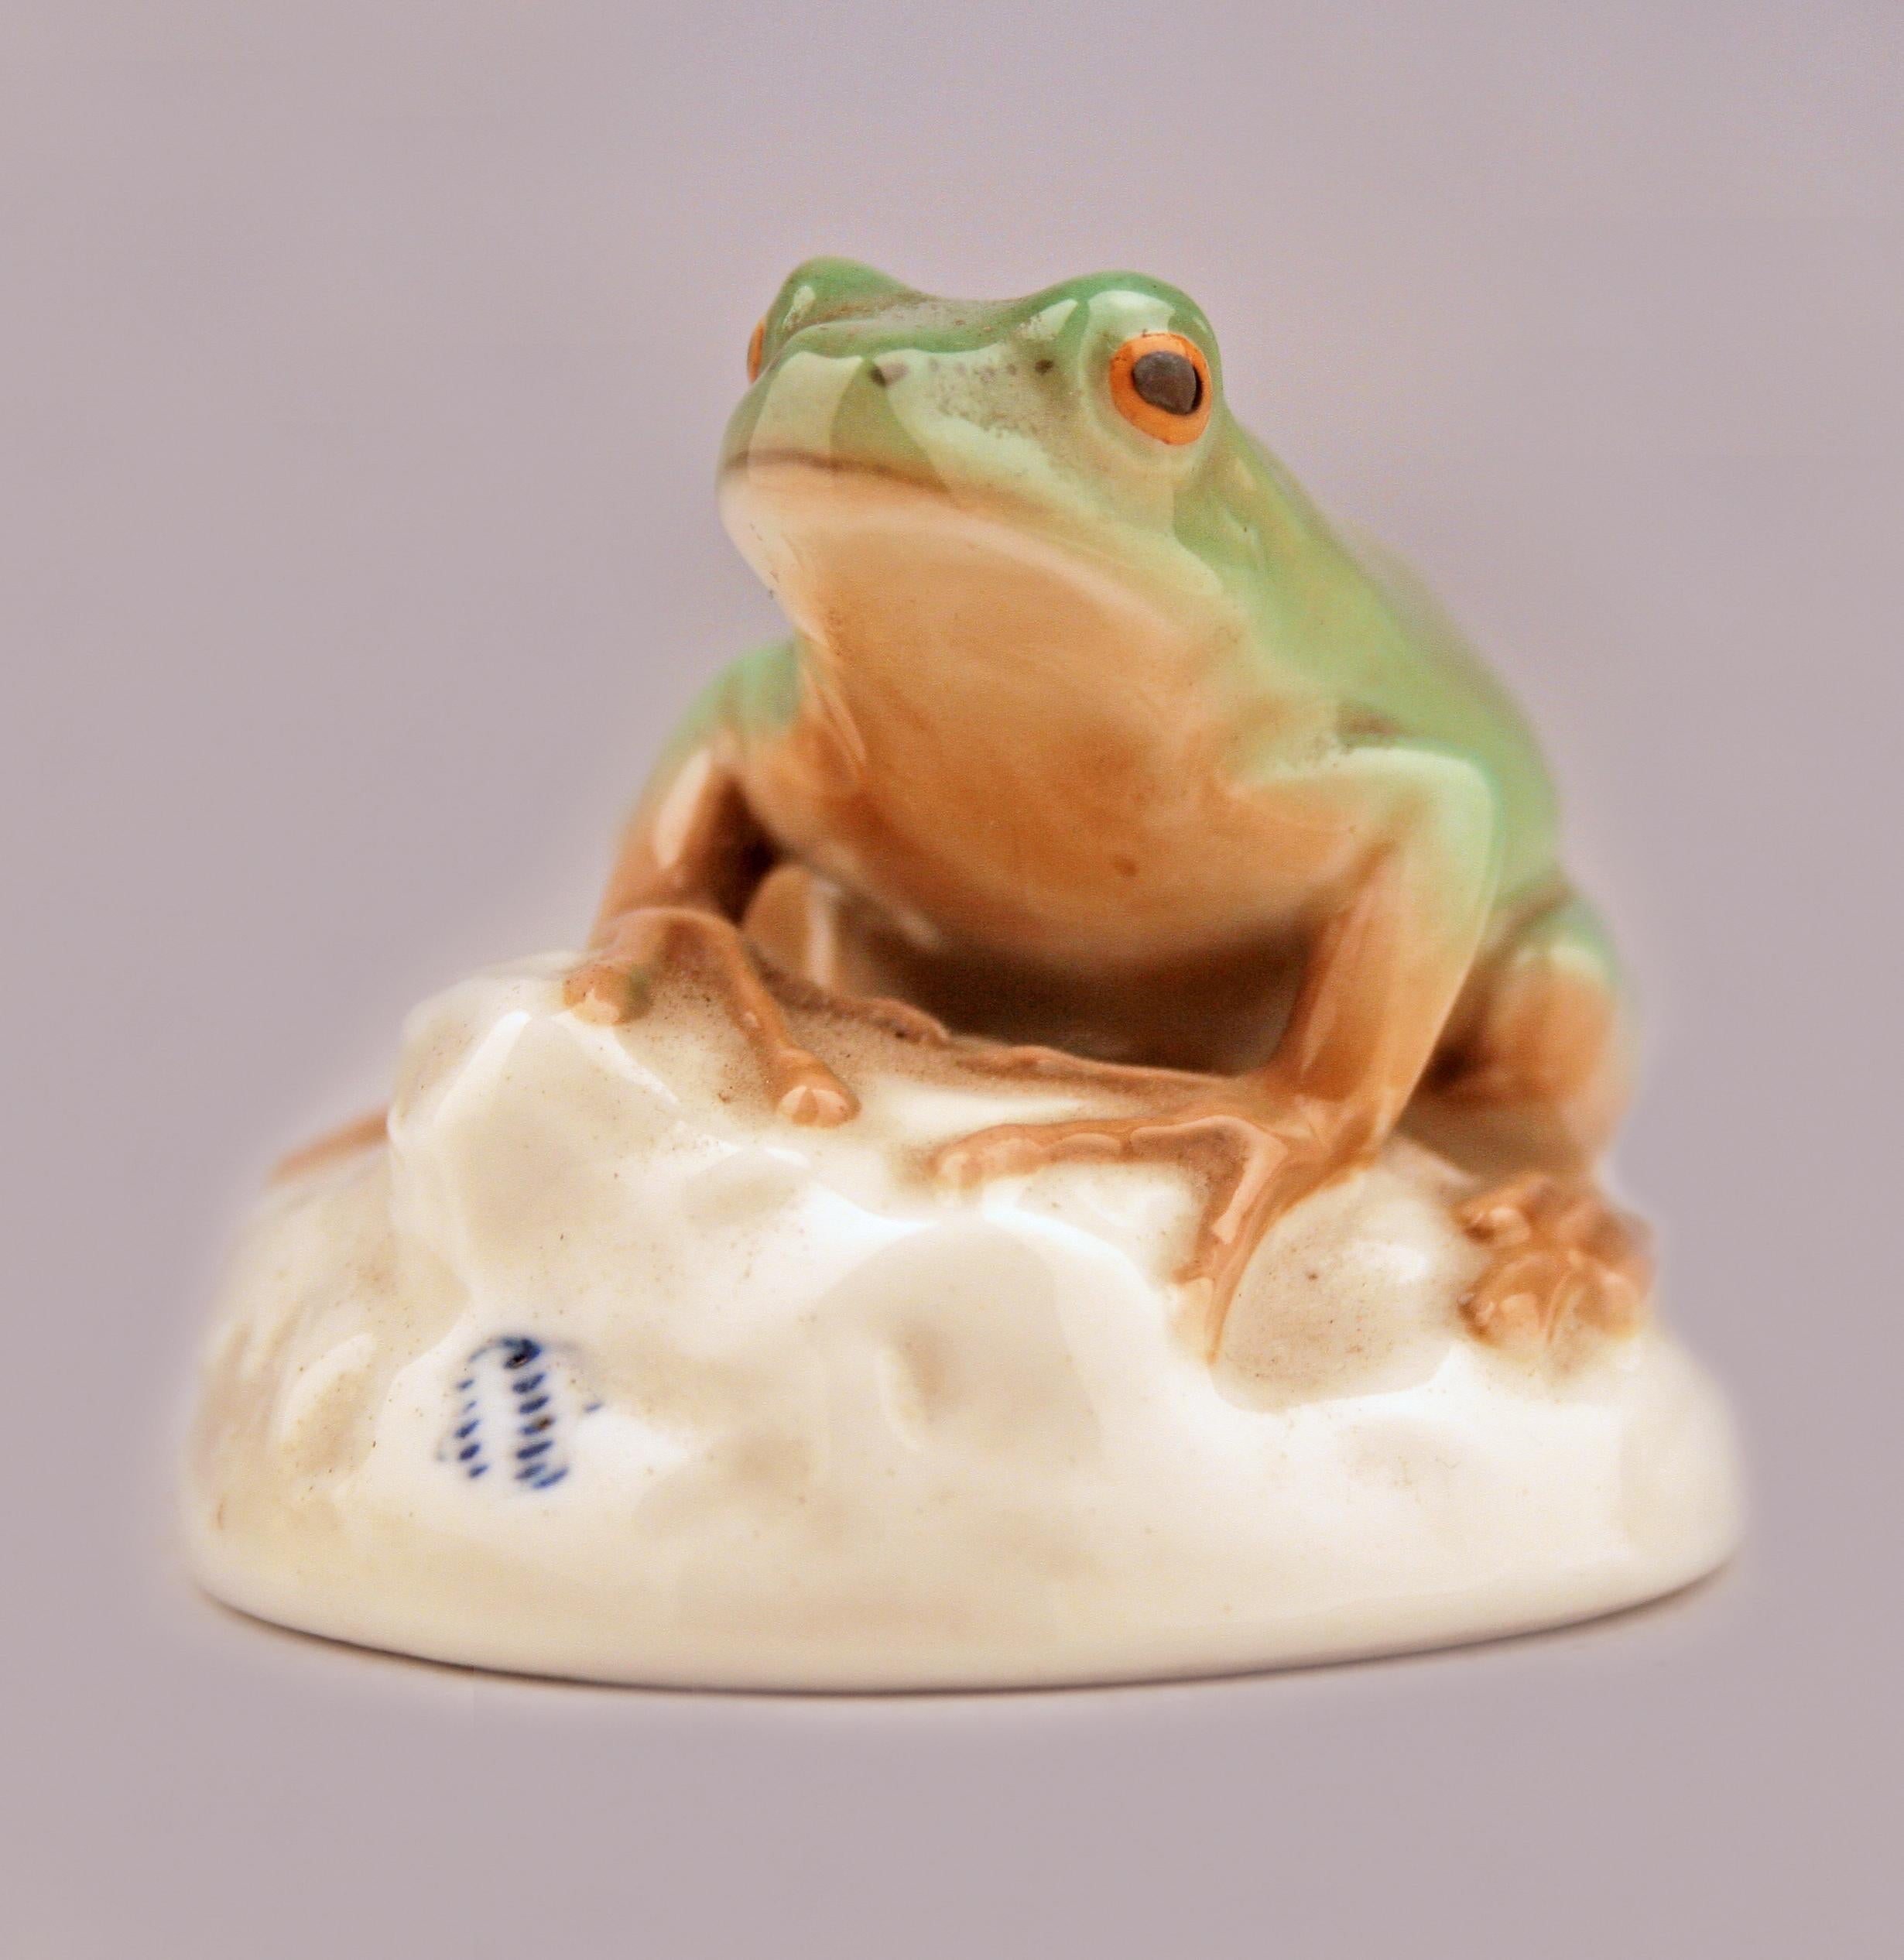 Mid-20th century modern german glazed and painted porcelain frog sitting on a rock by manufacturer Nymphenburg

By: Nymphenburg Porcelain
Material: porcelain, paint, ceramic
Technique: glazed, hand-painted, pressed, molded, painted
Dimensions: 3 in